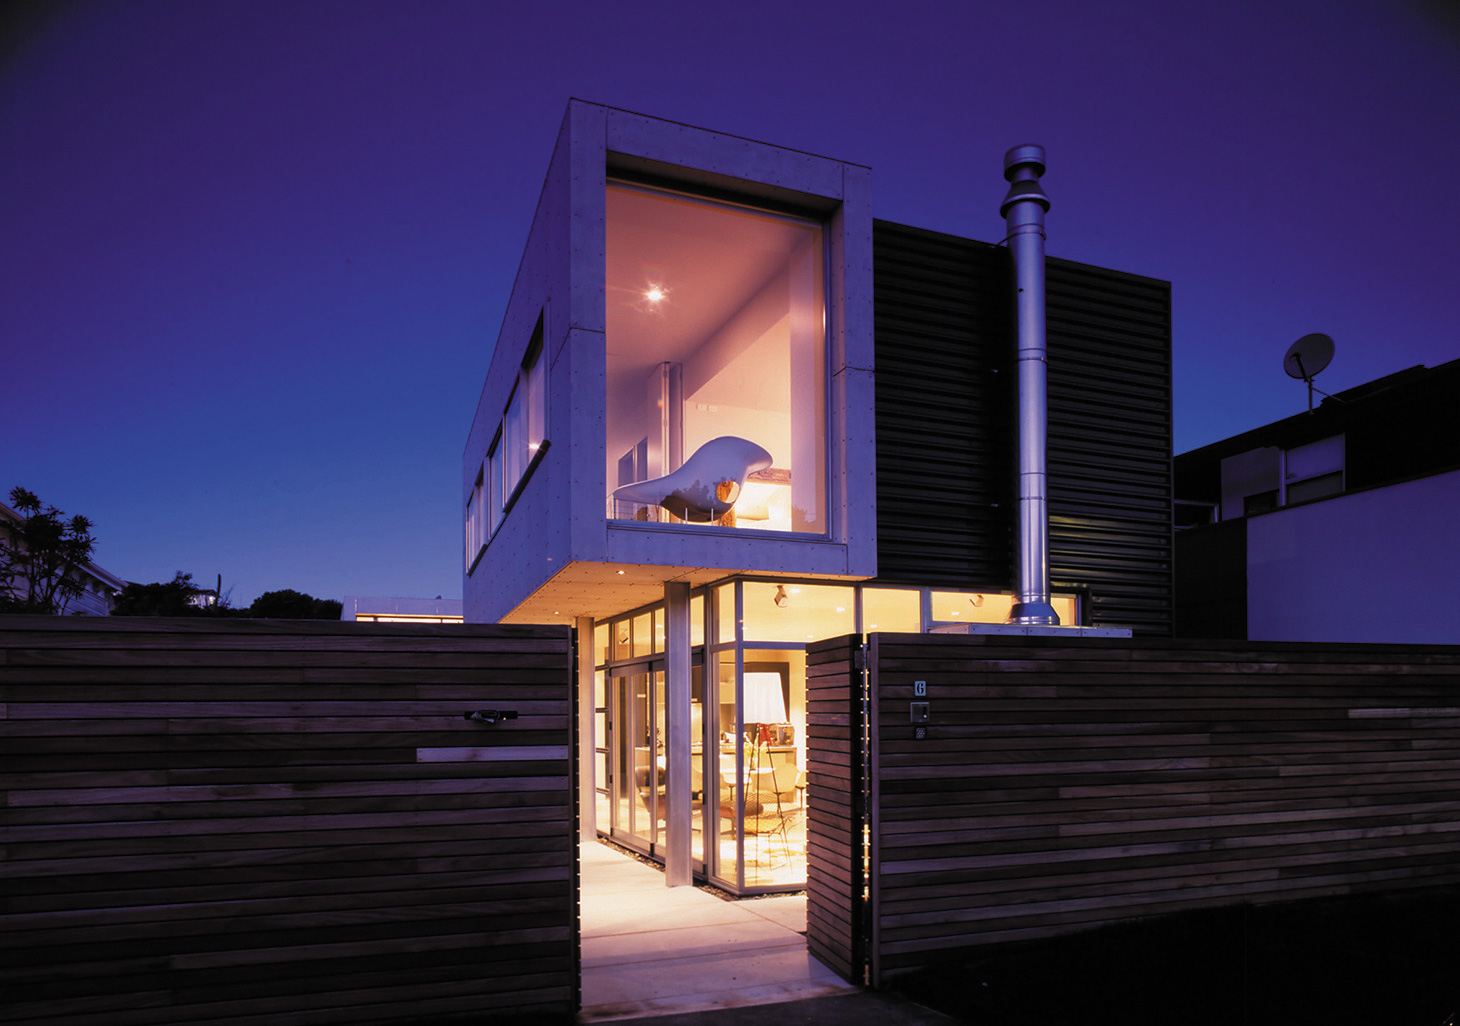 Northland Townhouses - Night Exterior View. Wellington